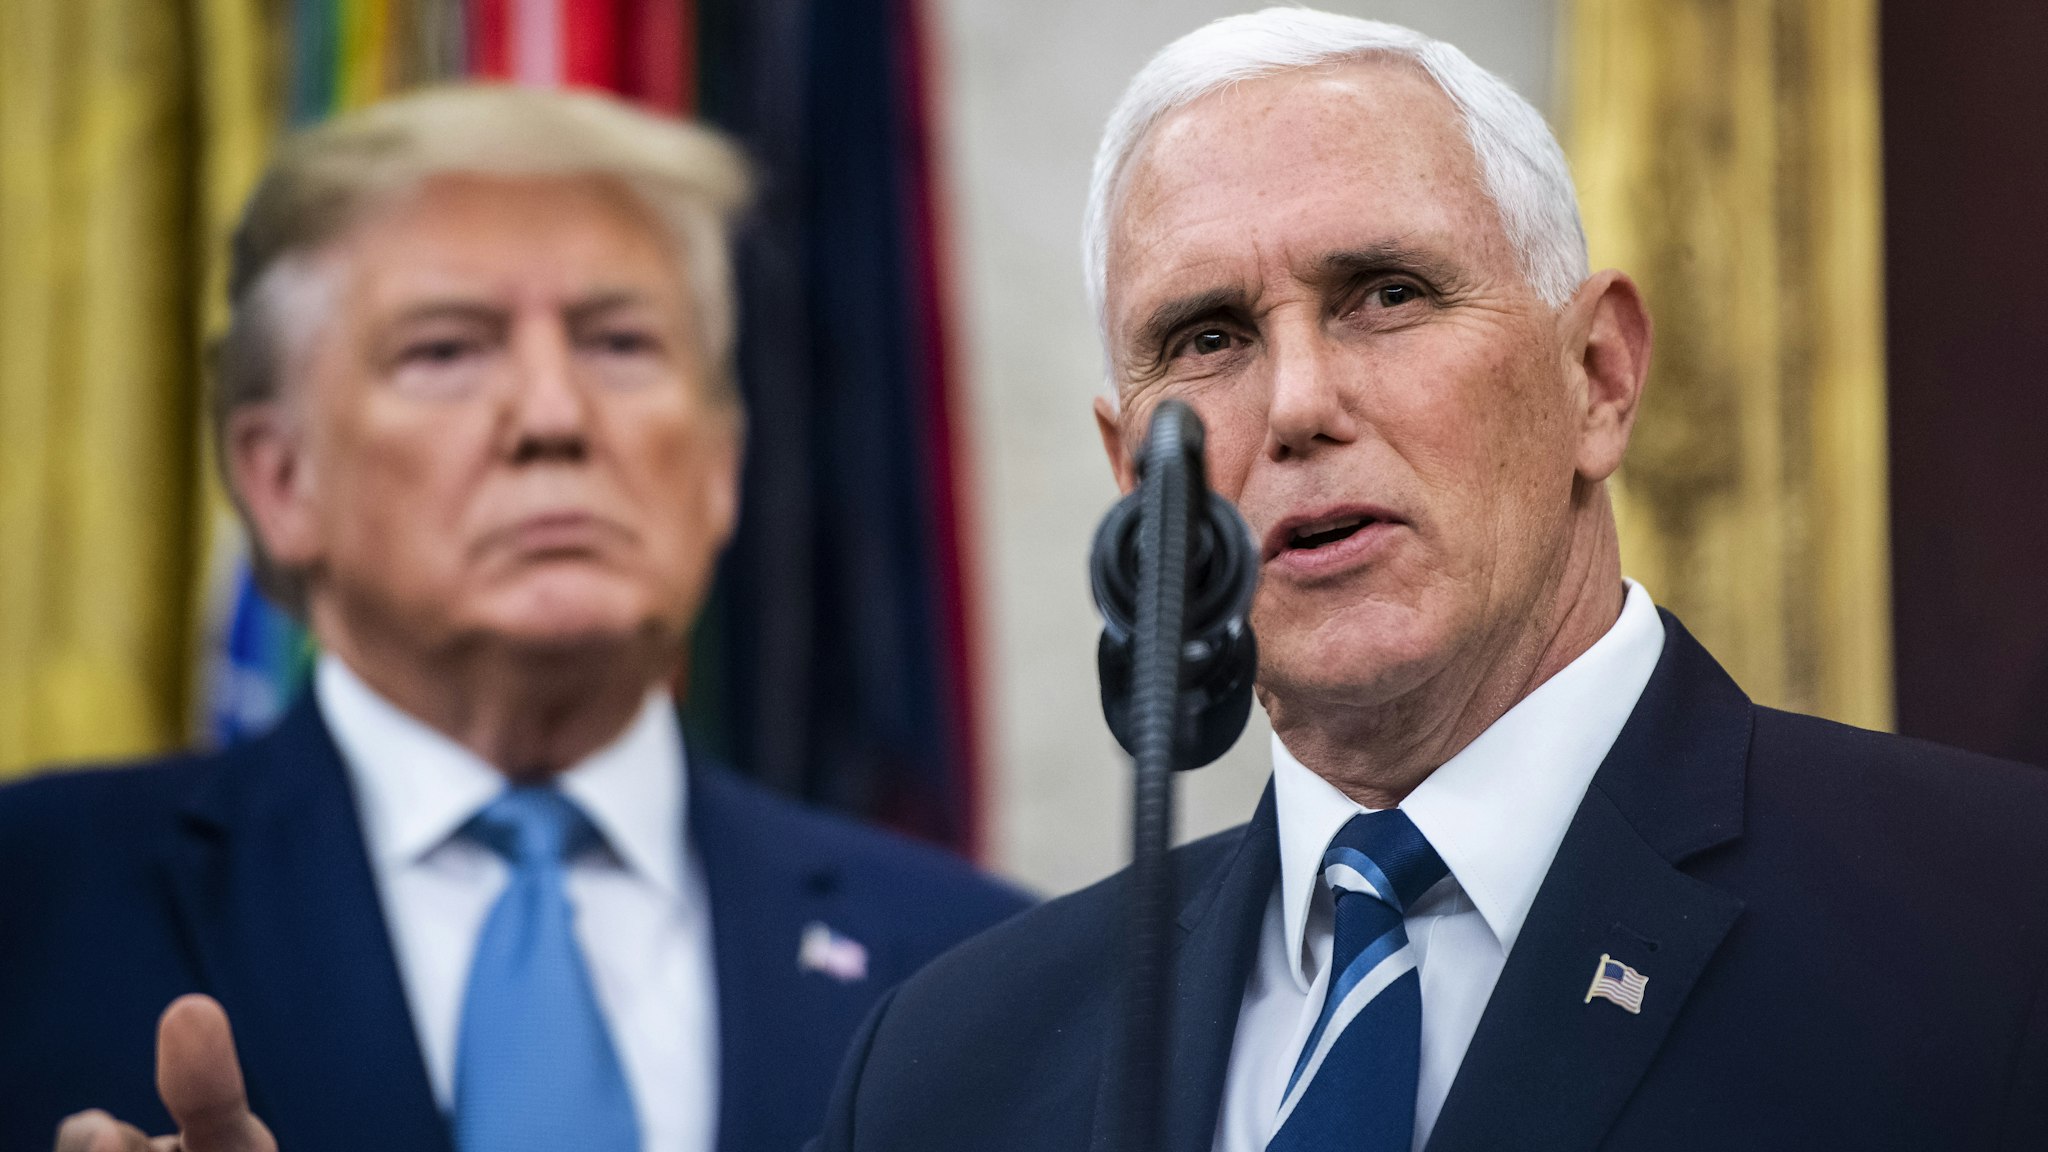 WASHINGTON, DC - OCTOBER 8 : President Donald J. Trump listens to Vice President Mike Pence speak during a ceremony to award the Presidential Medal of Freedom to Edwin Meese III in the Oval Office at the White House on Tuesday, Oct 08, 2019 in Washington, DC.